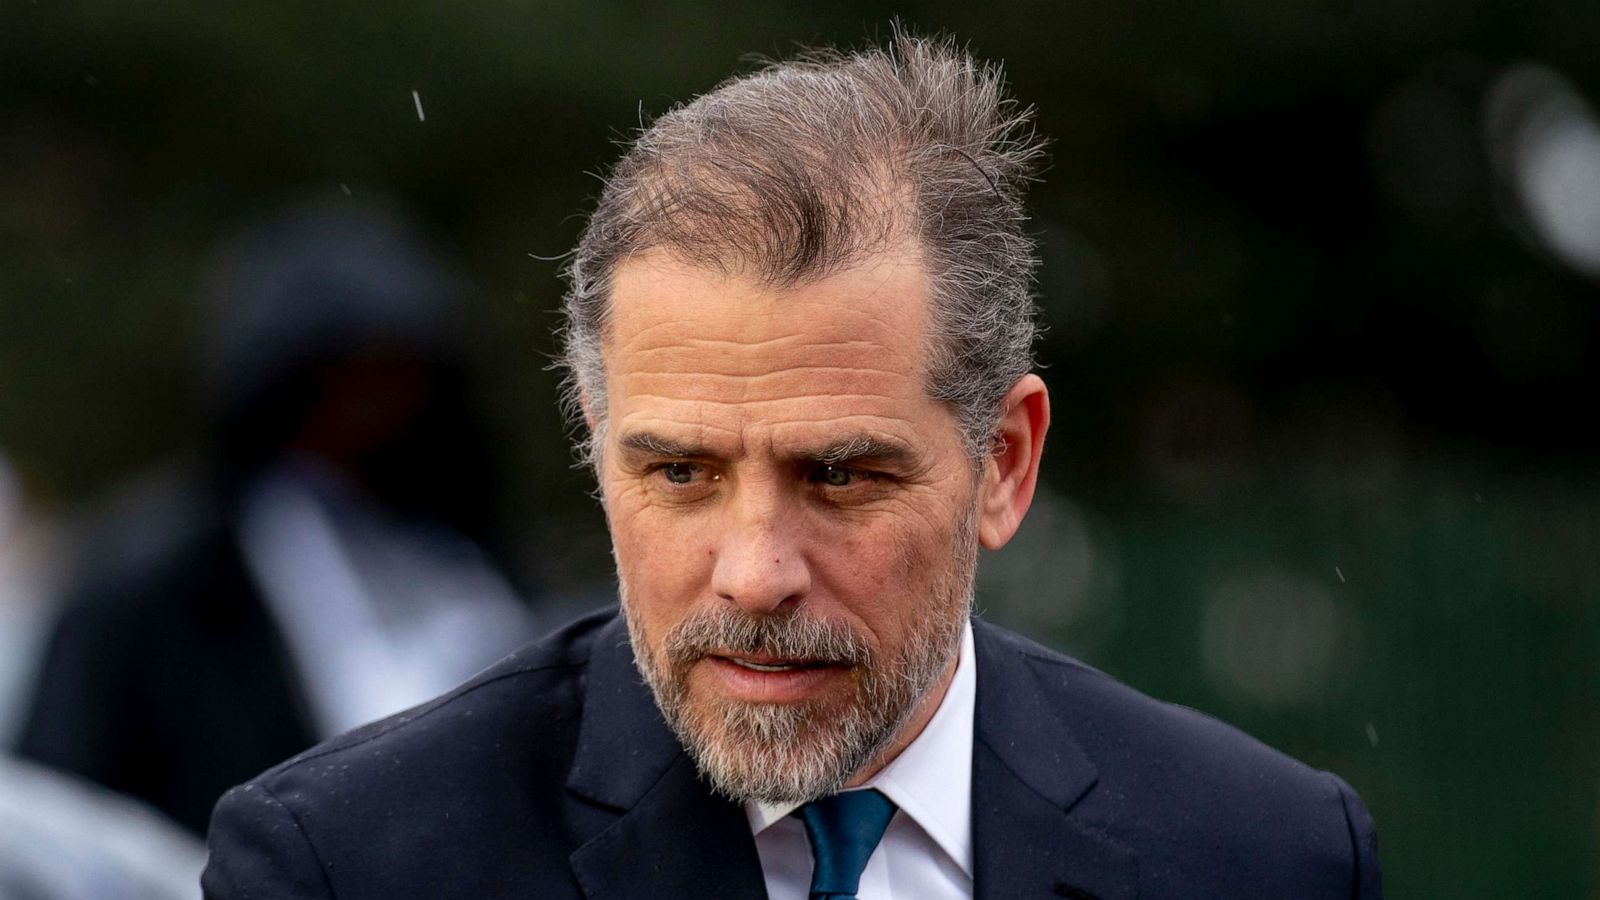 Hunter Biden's aggressive new legal strategy initially caused anxiety at  White House